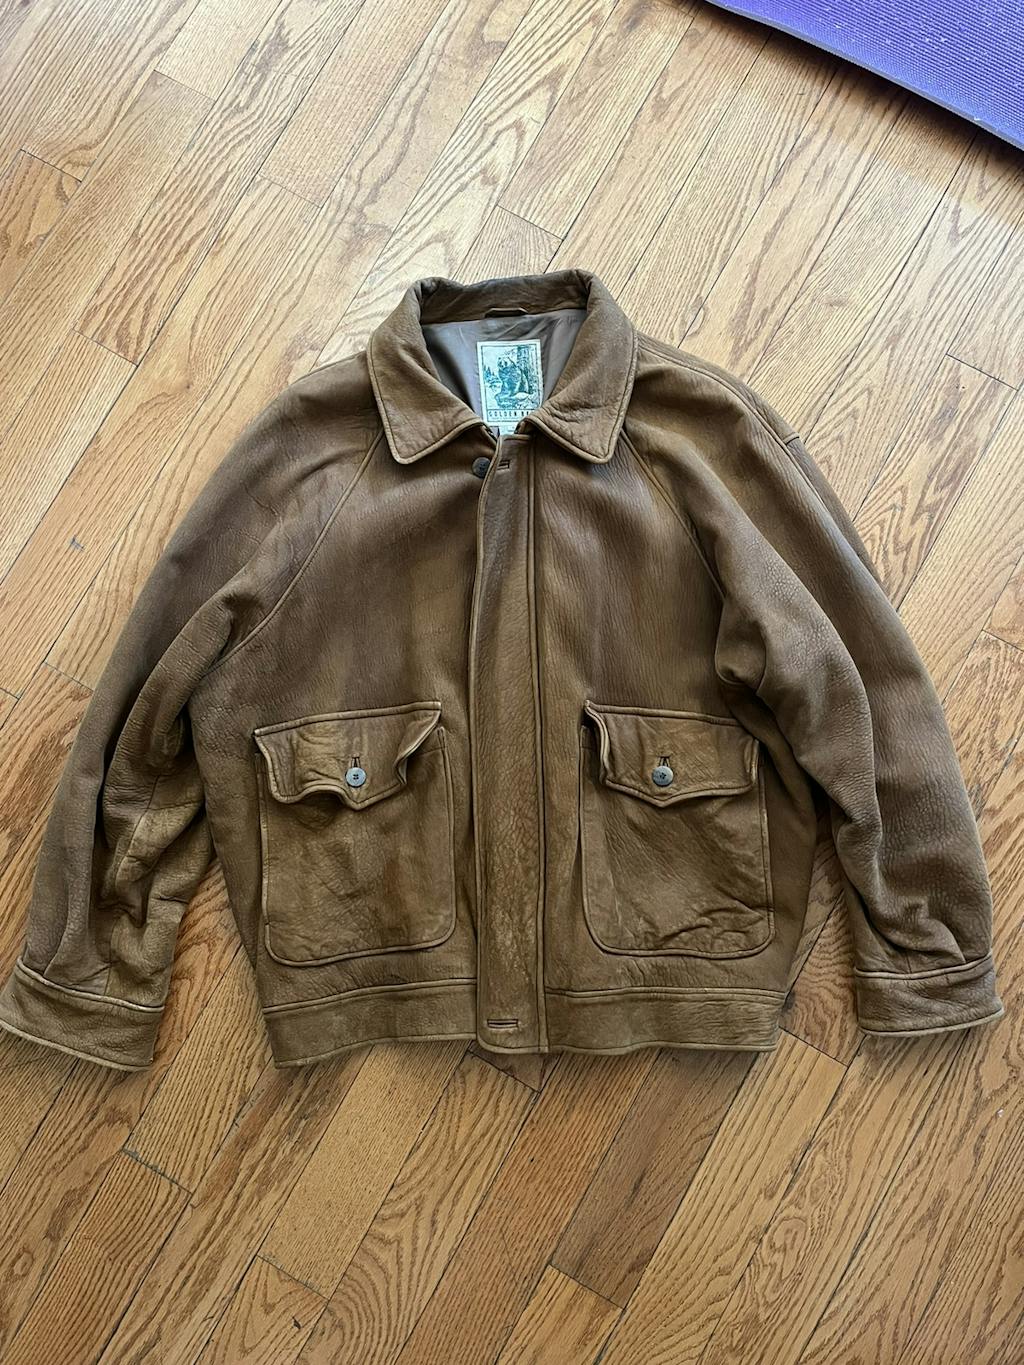 Is this jacket saveable? | Vintage Leather Jackets Forum